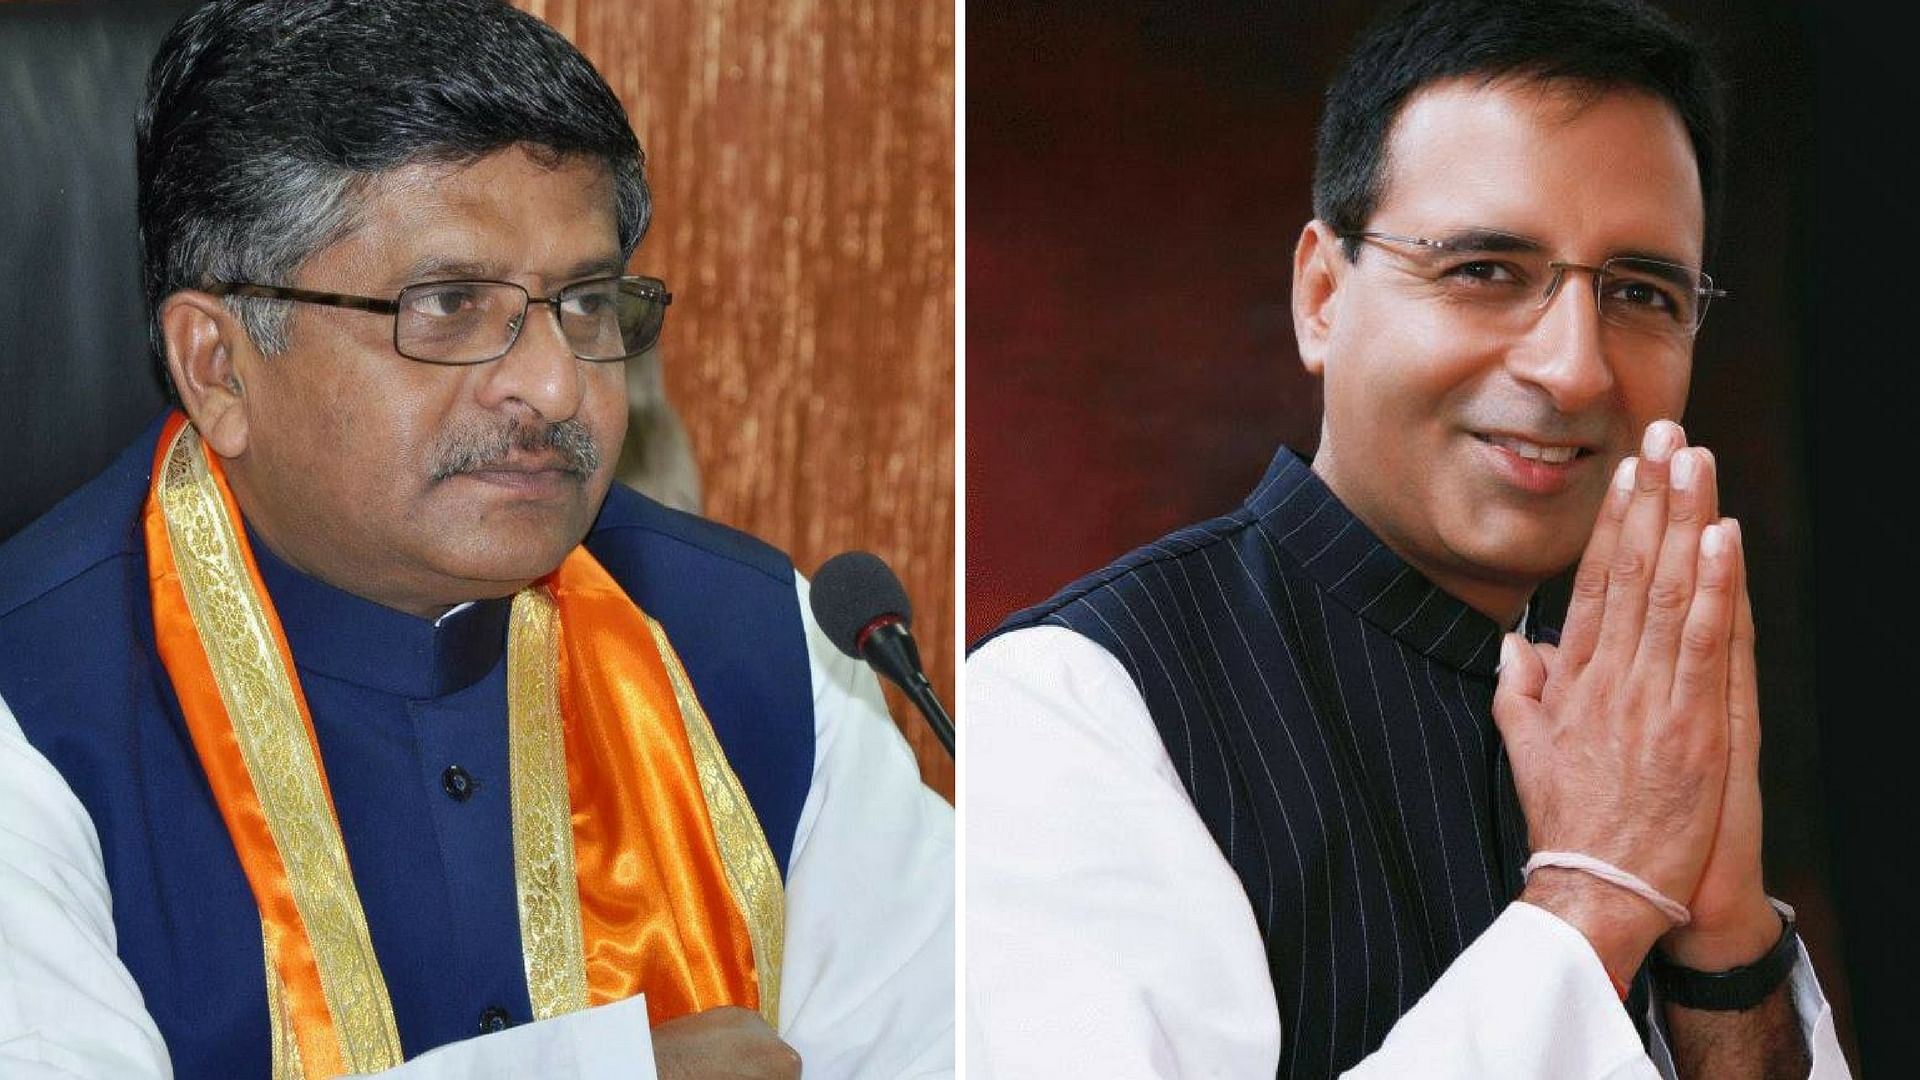 The BJP’s Ravi Shankar Prasad and the Congress’ Randeep Surjewala accused each other’s party of hiring the services of Cambridge Analytica.